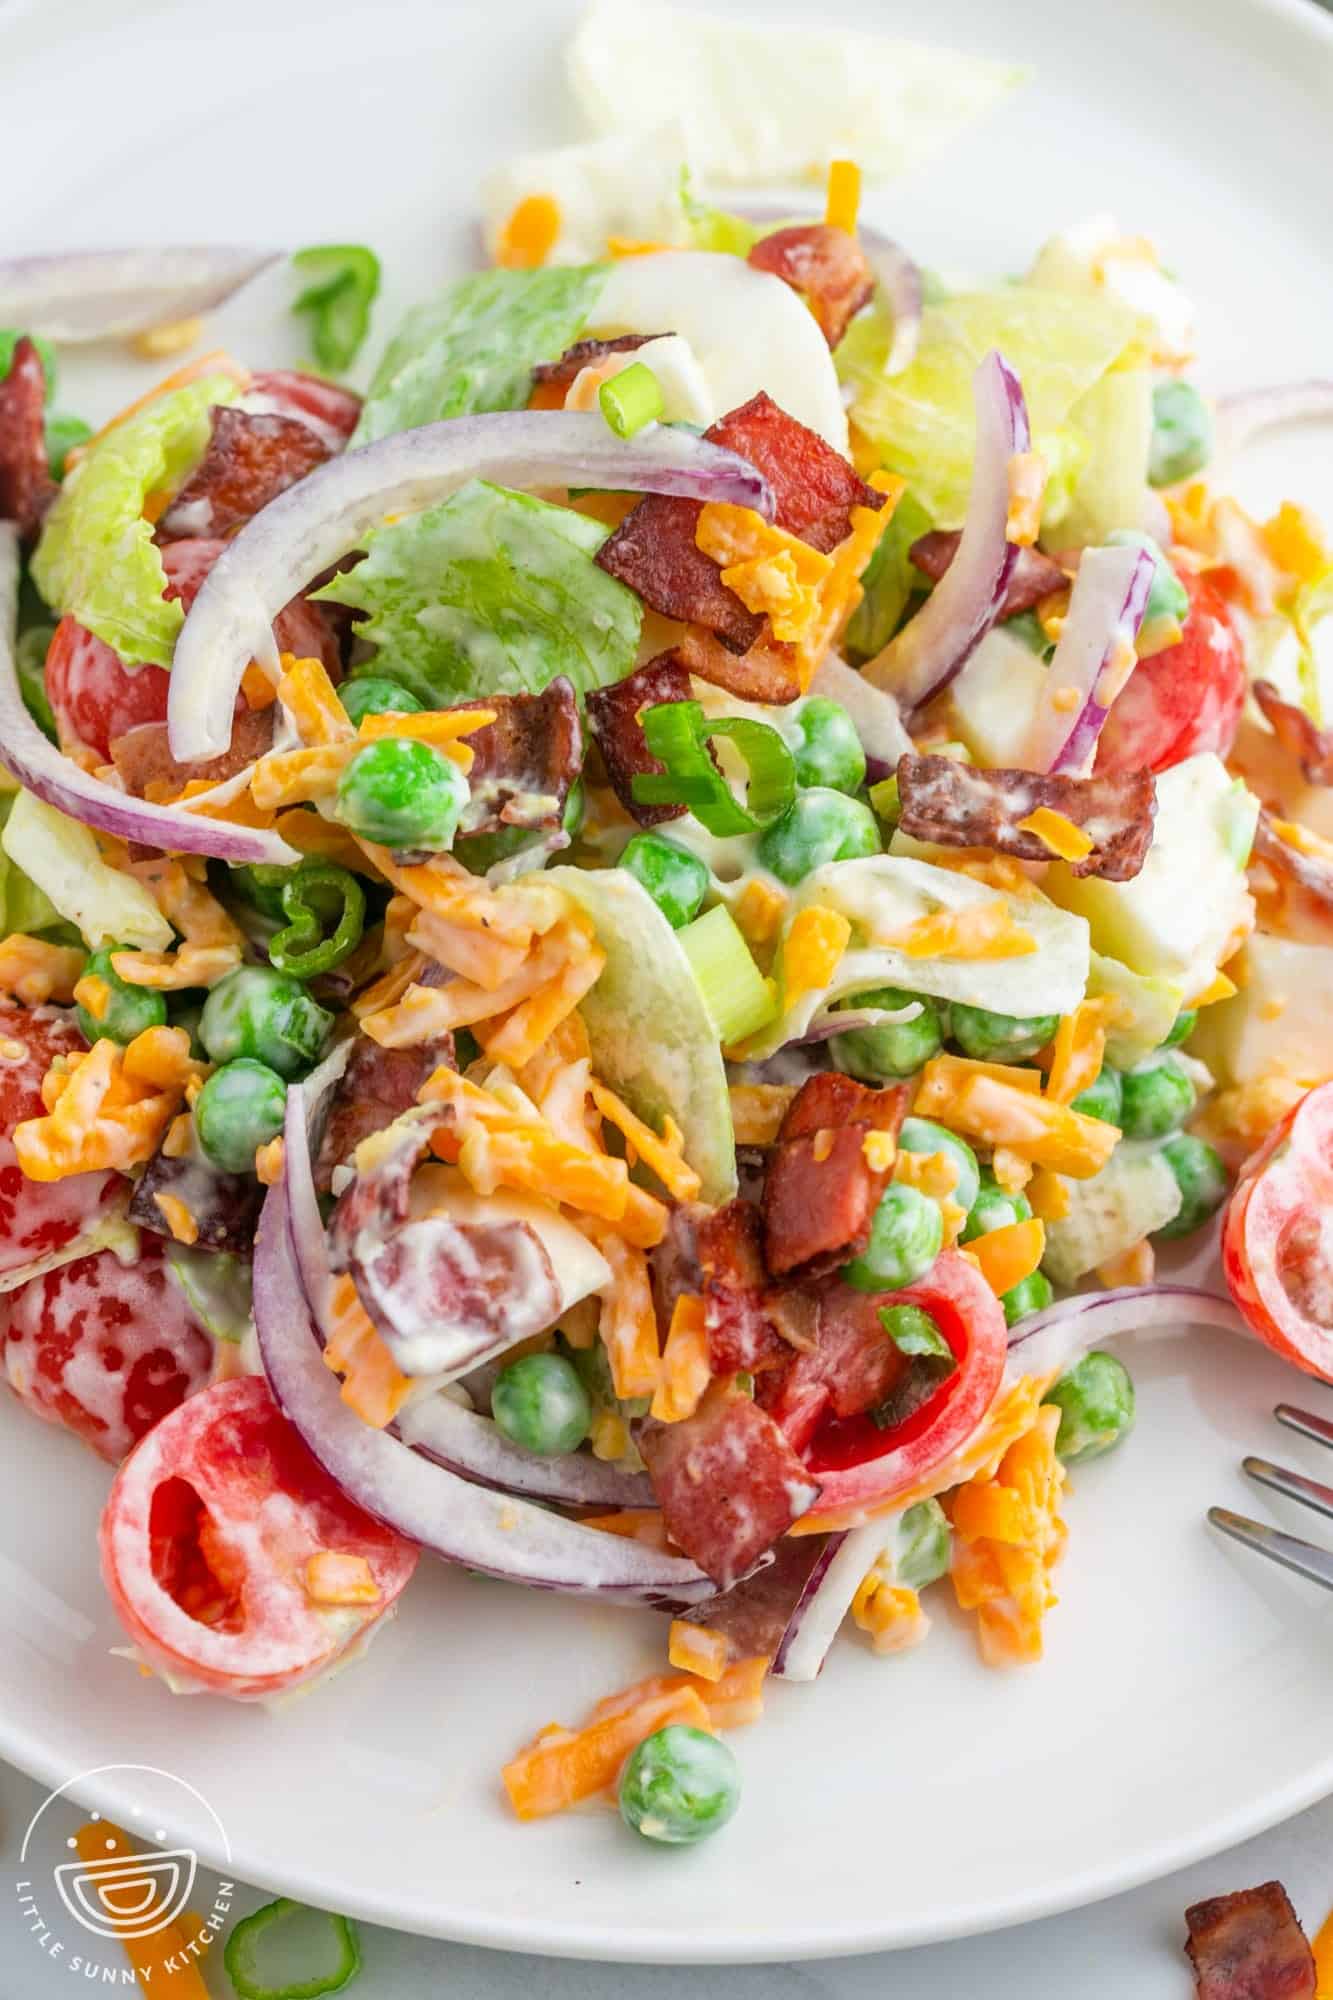 A dinner plate with 7 layer salad with a creamy dressing. The salad includes cherry tomatoes, bacon, eggs, red onion, peas, and bacon